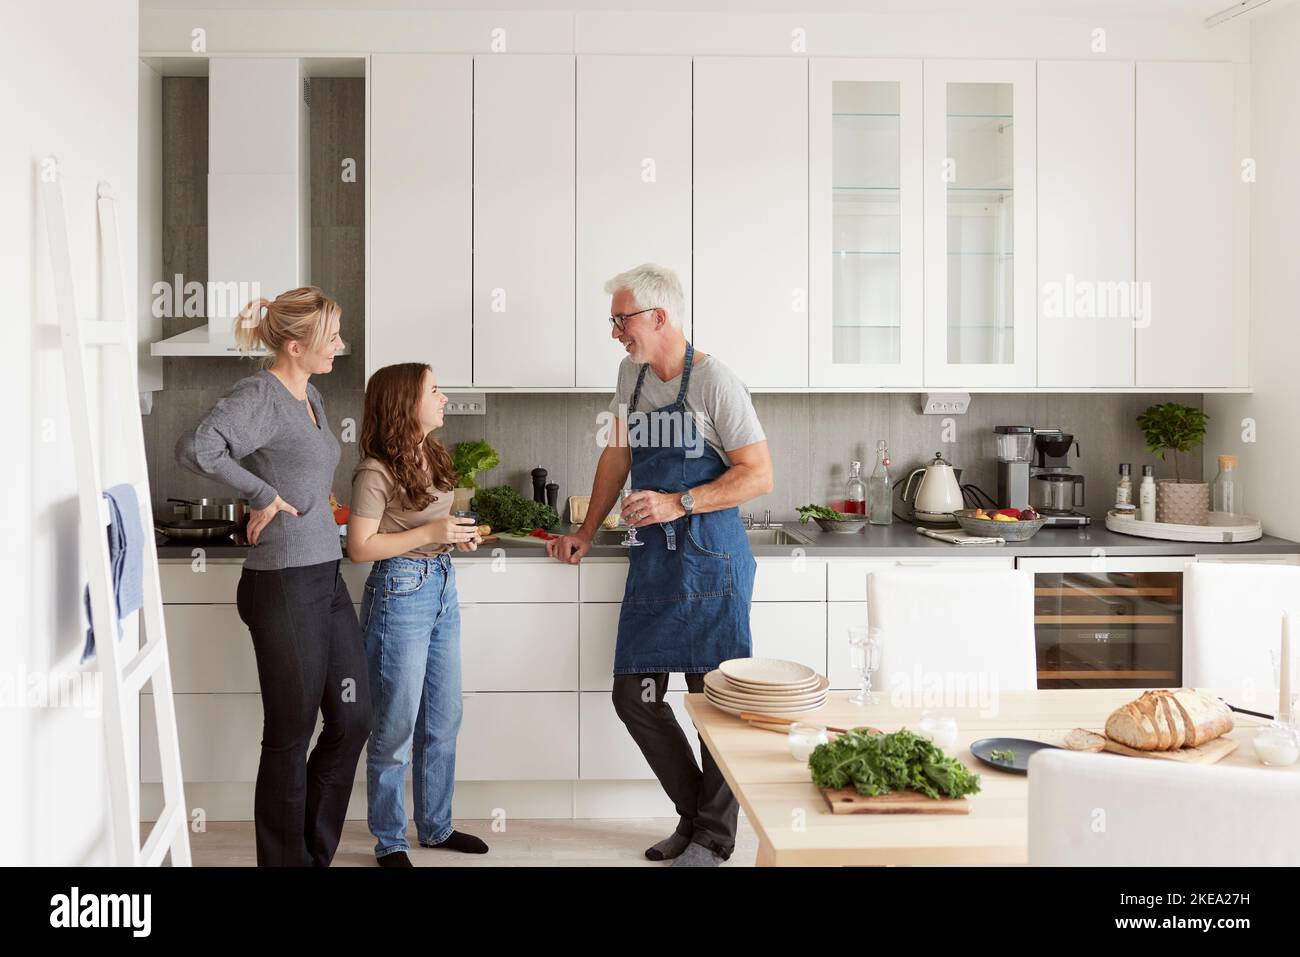 Family standing in kitchen Stock Photo